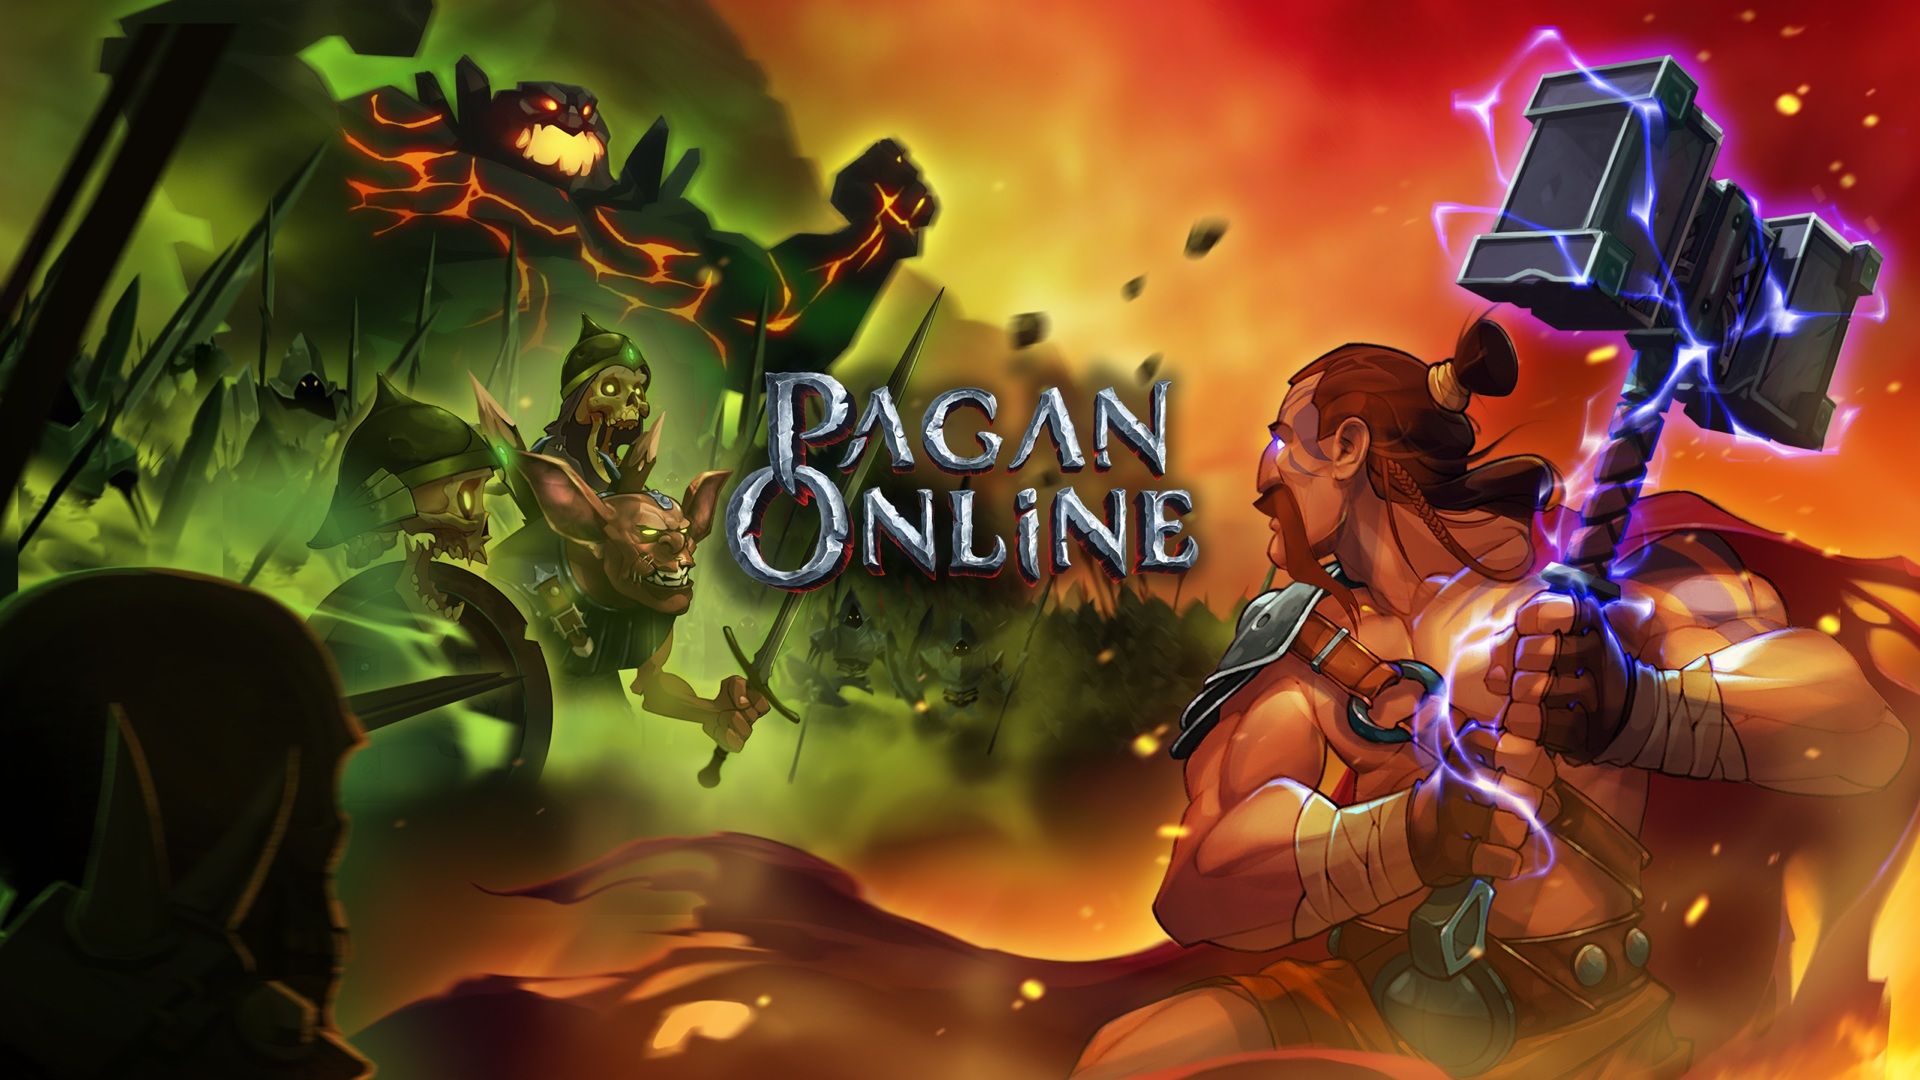 Pagan Online is a hack-and-slash action RPG from the creator of World of Tanks